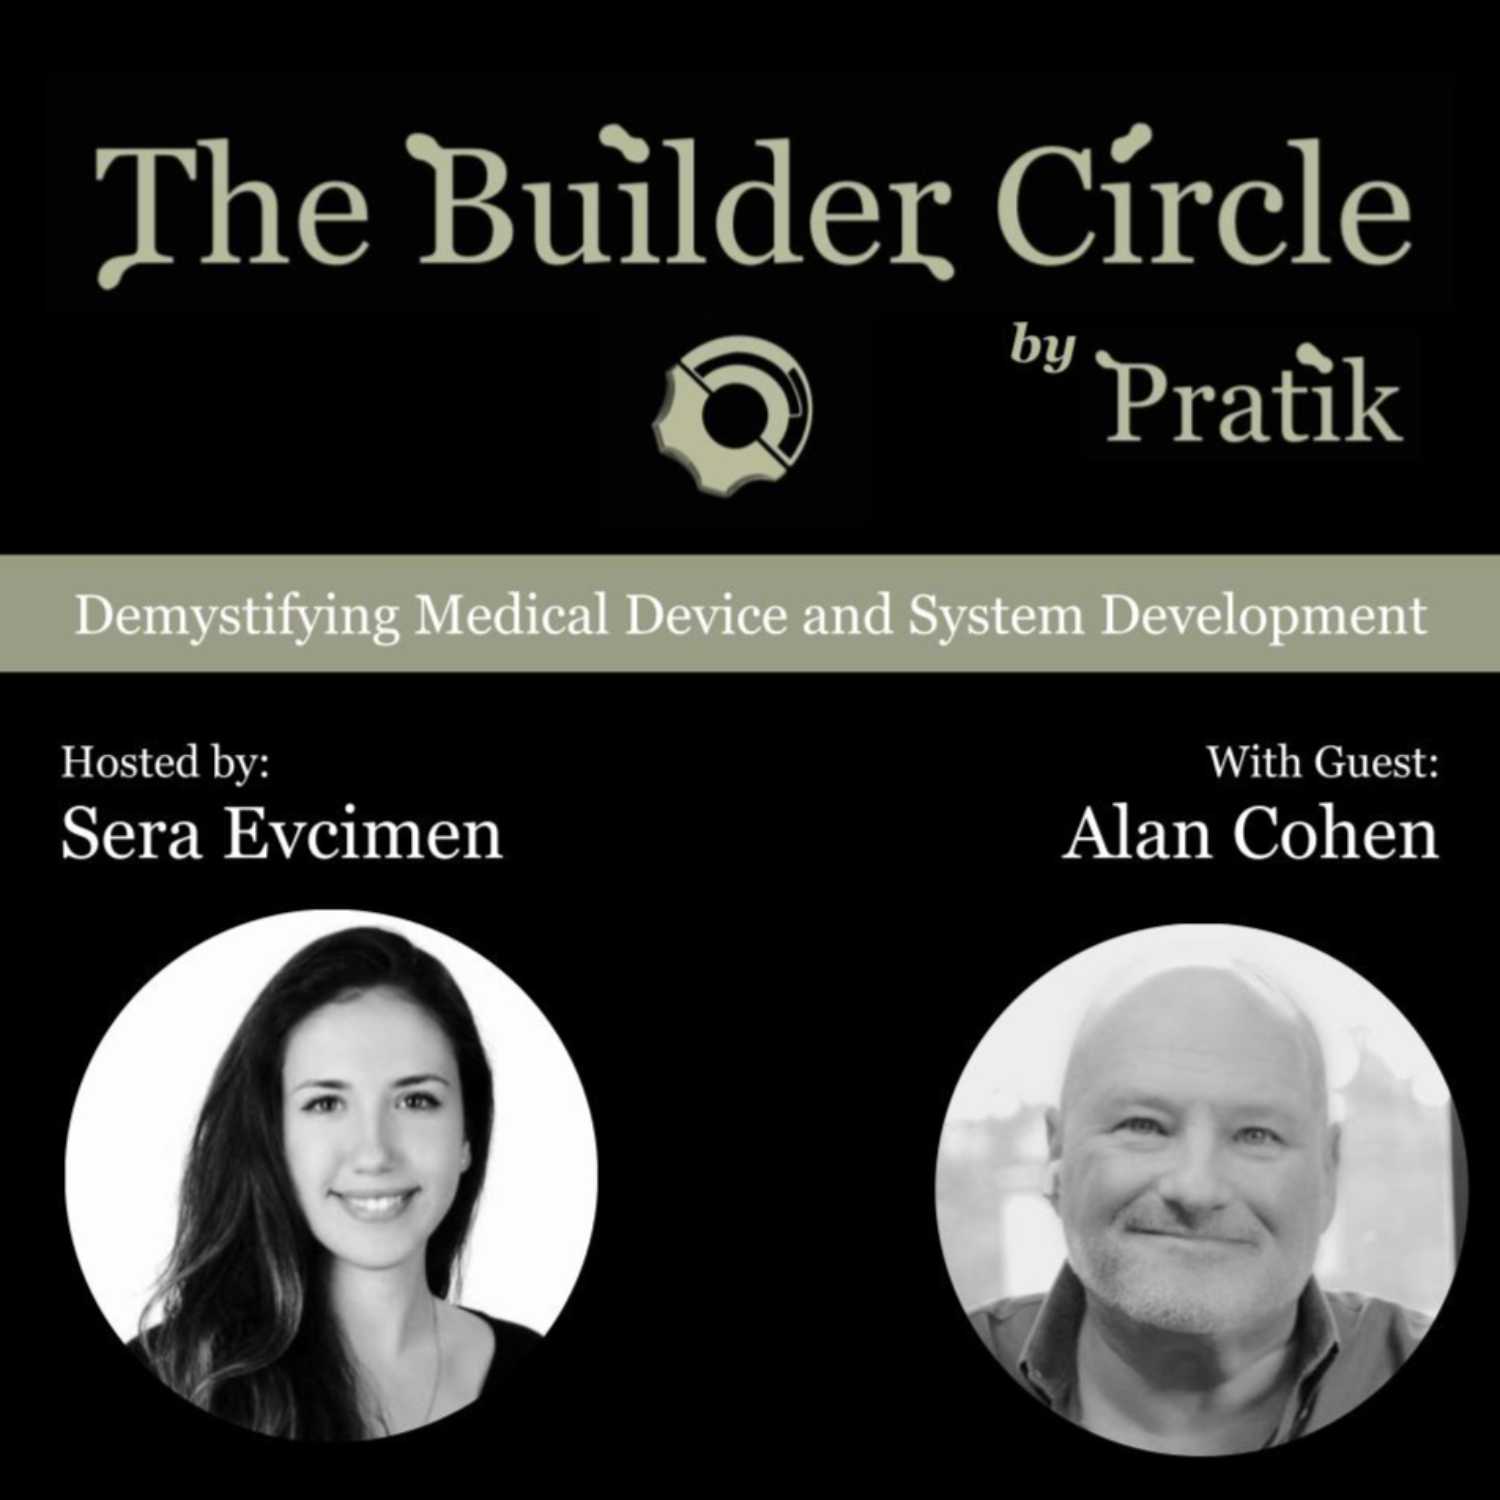 S2 E2: Demystifying Medical Device and System Development with Alan Cohen